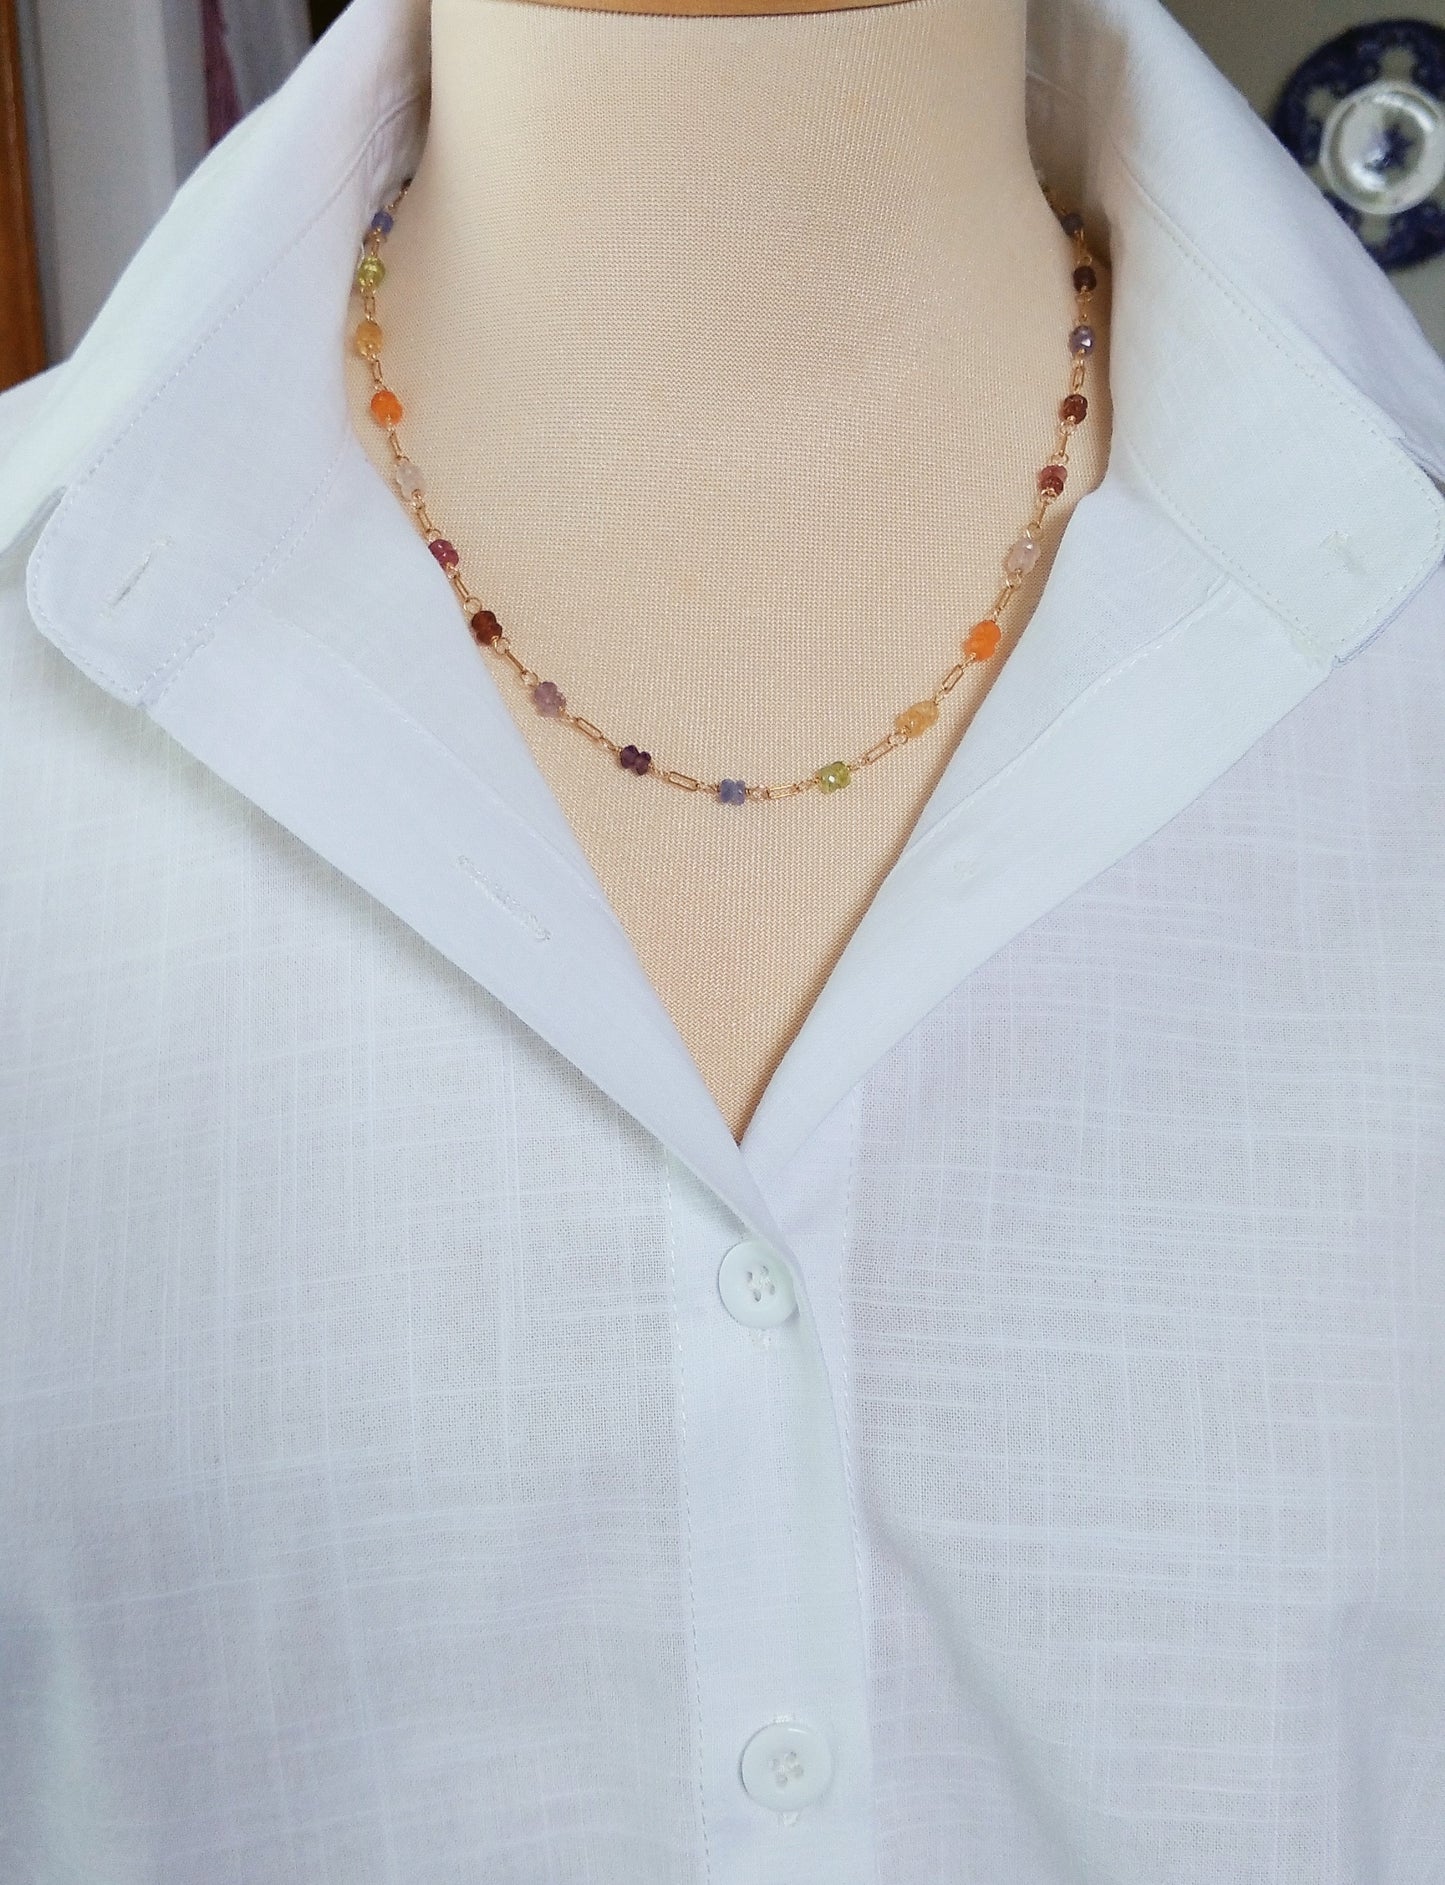 Rainbow Multi Gemstone Necklace with Paperclip Chain Link - Rhea